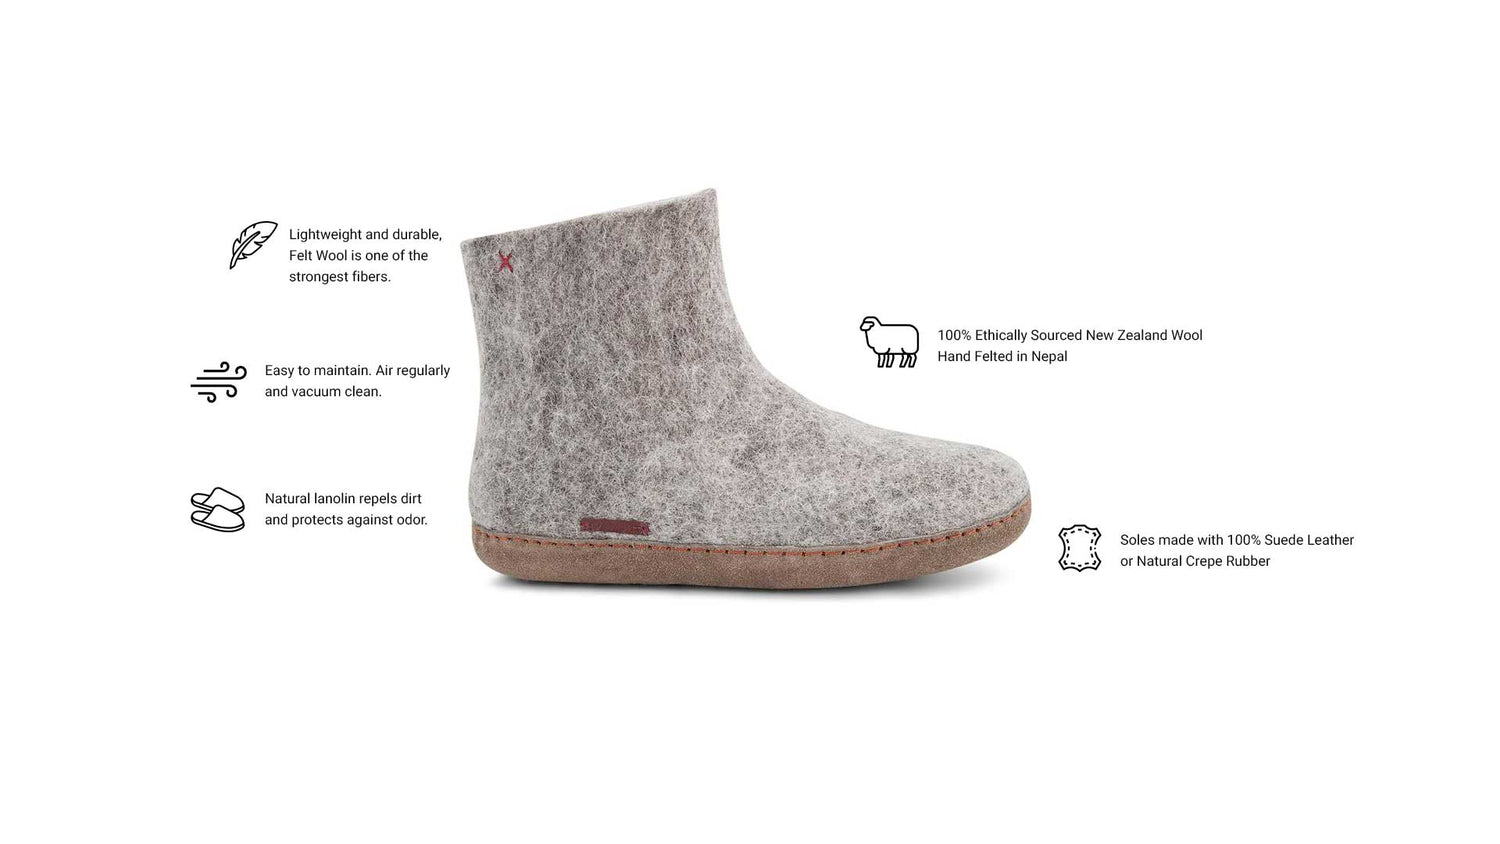 Betterfelt Slipper Diagram That Highlights Our Product Attributes Including Lightweight And Durable, Easy To Maintain, Uses Ethically Sourced New Zealand Wool, Made In Nepal, Fair Trade Certified.